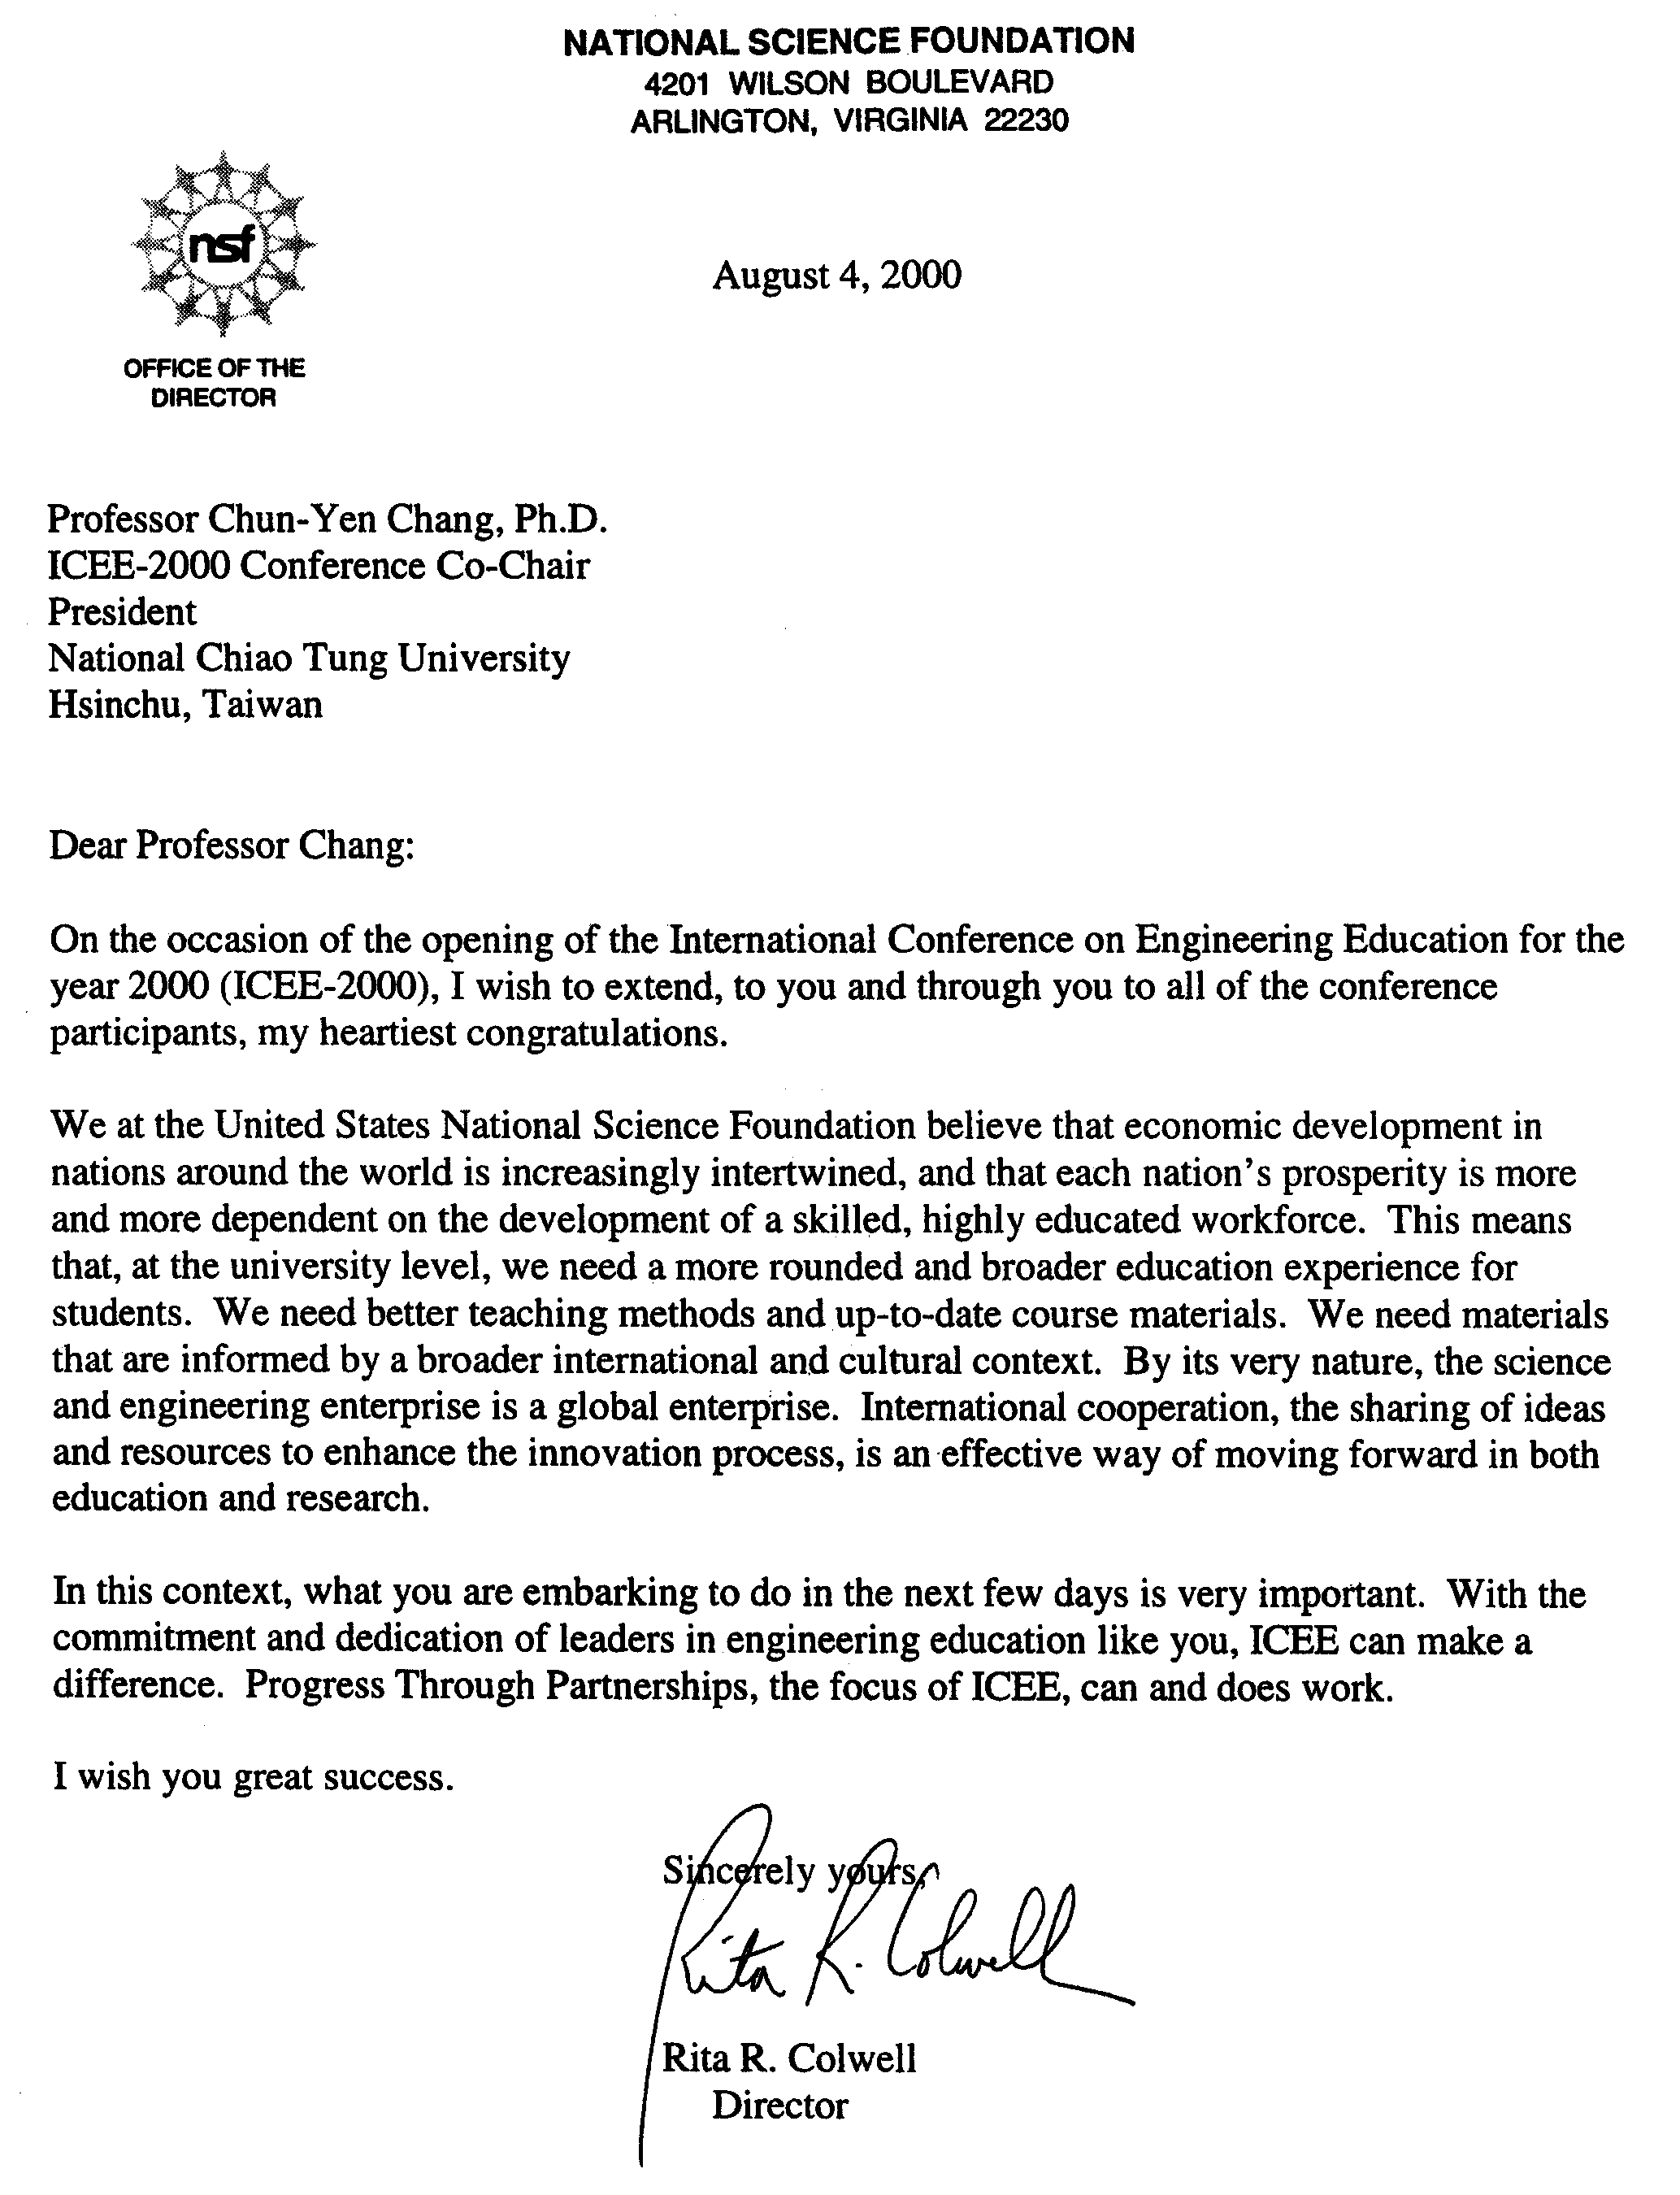 Congratulatory Letter to Prof. Chun-Yen Chang, President, National Chiao Tung University and ICEE-2000 Conference Co-Chair